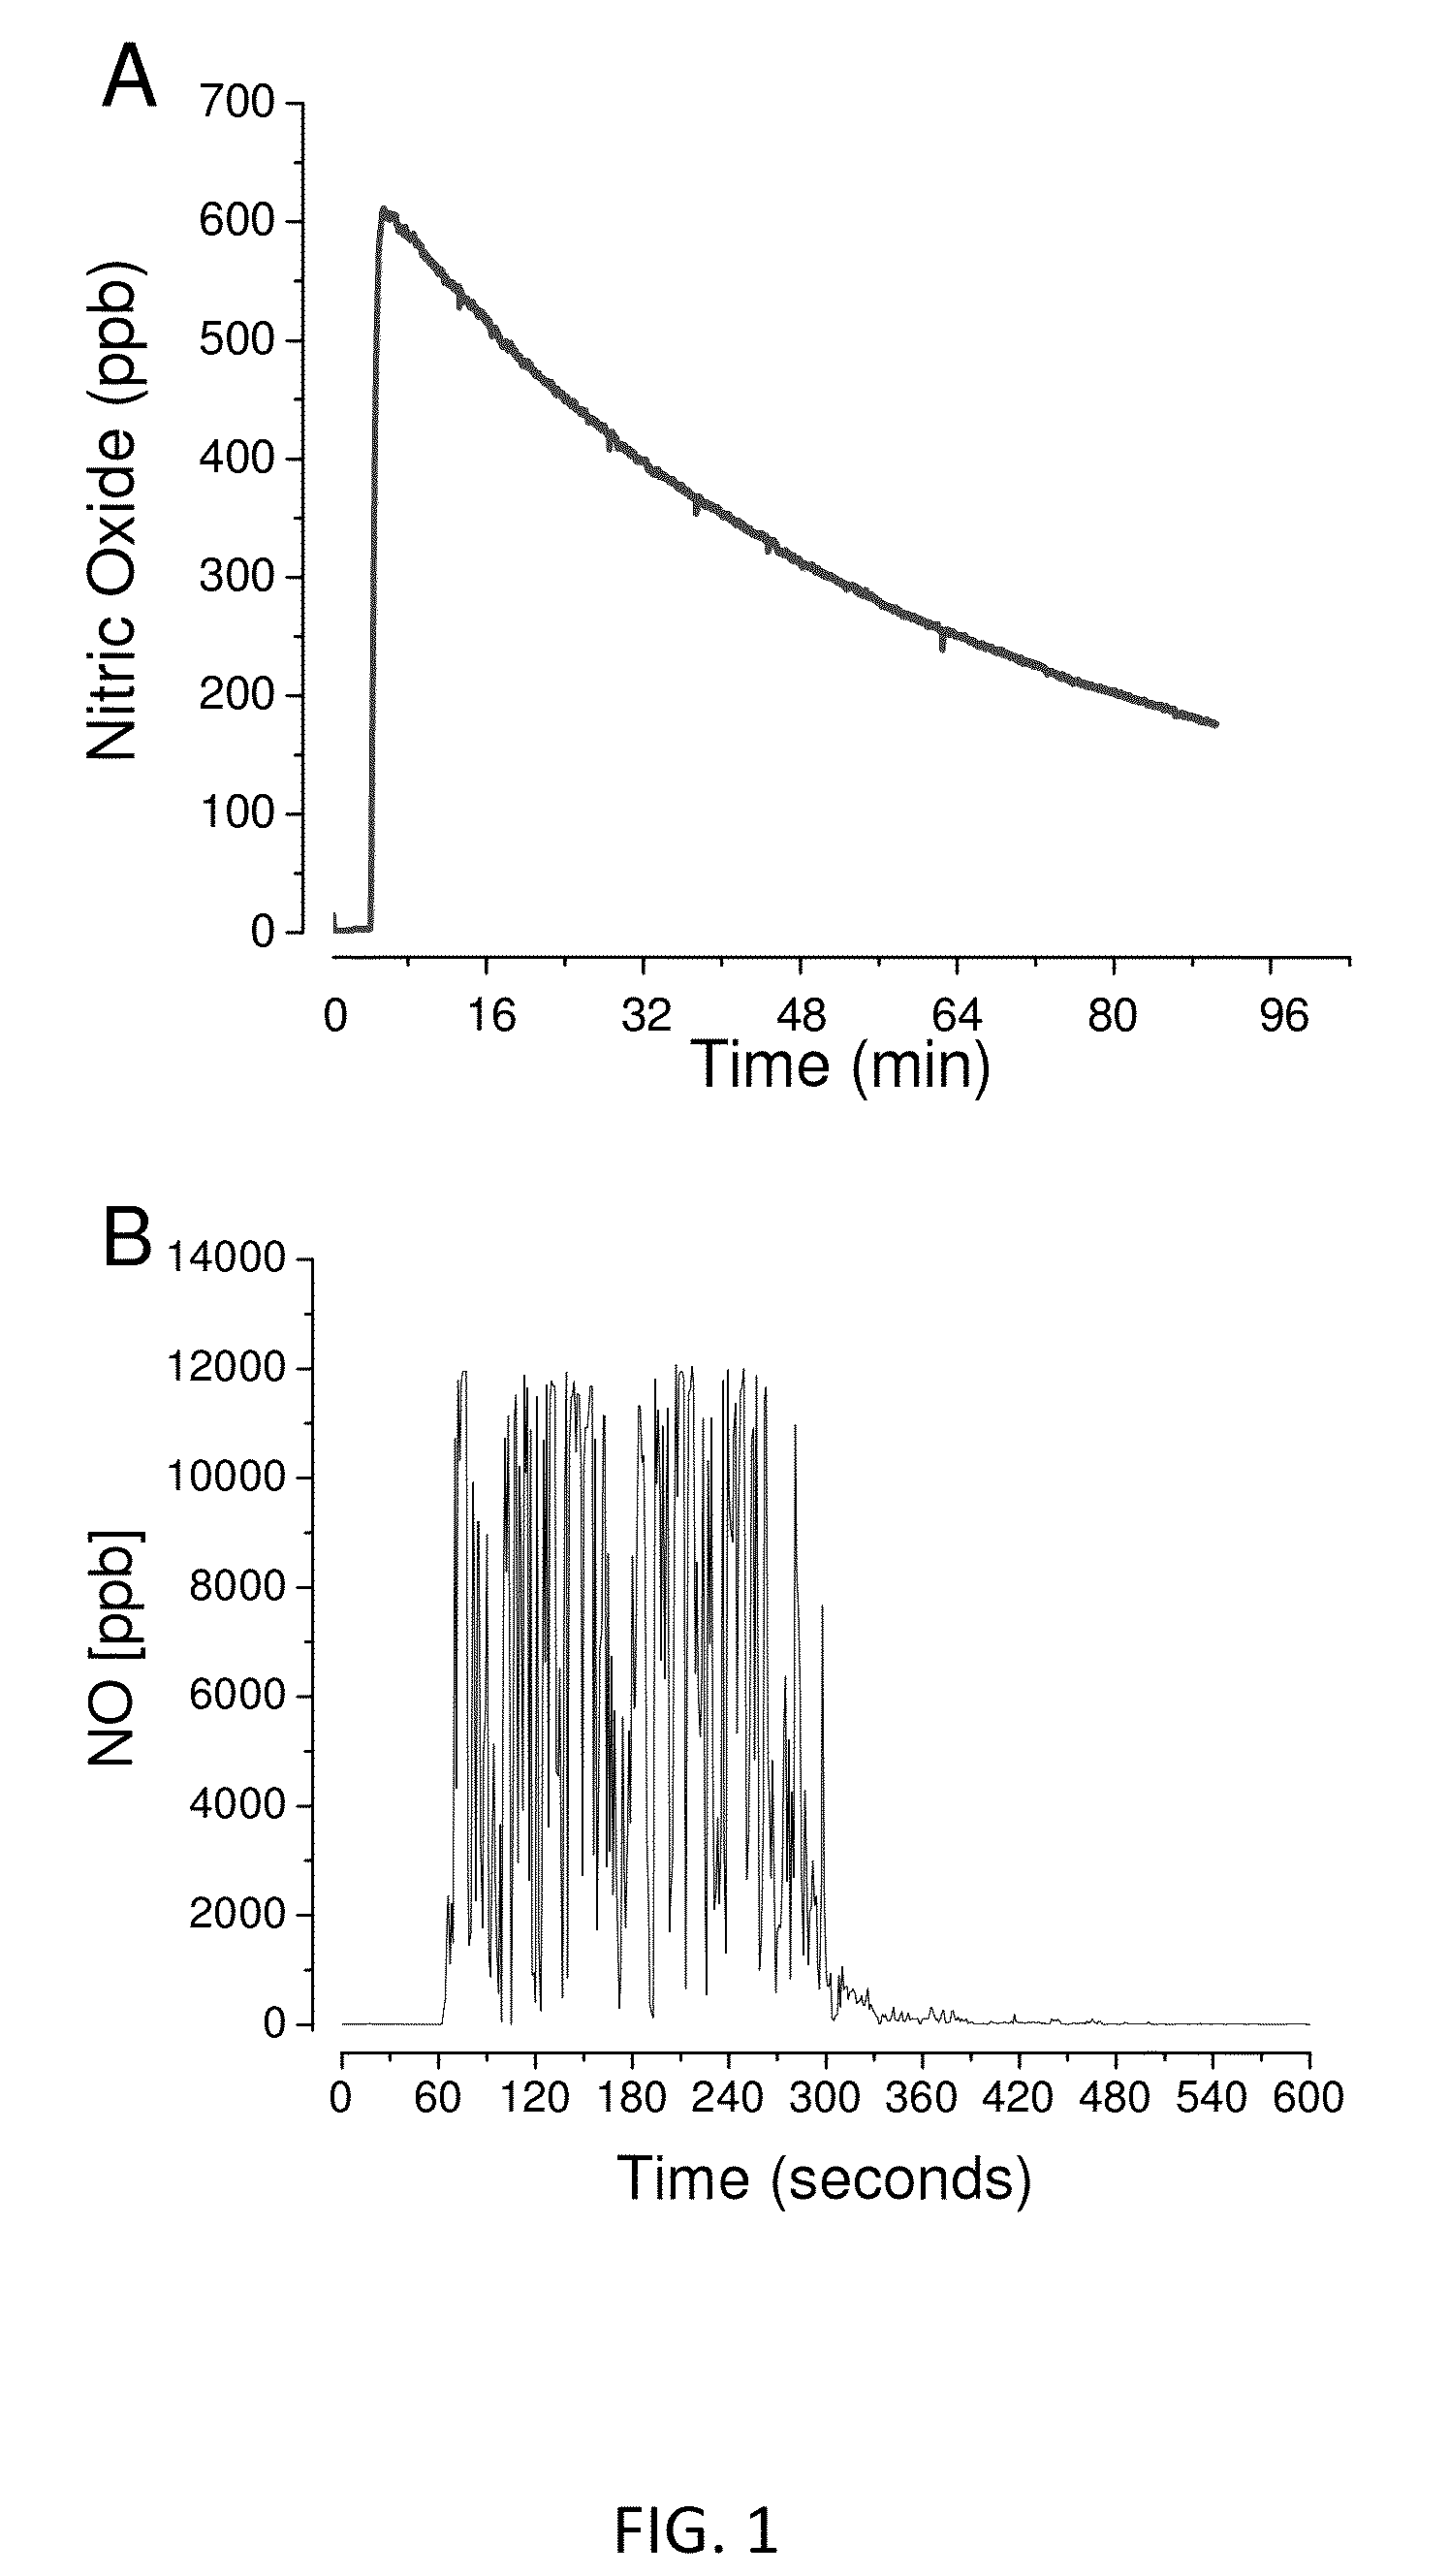 Method of Producing Physiological and Therapeutic Levels of Nitric Oxide Through an Oral Delivery System